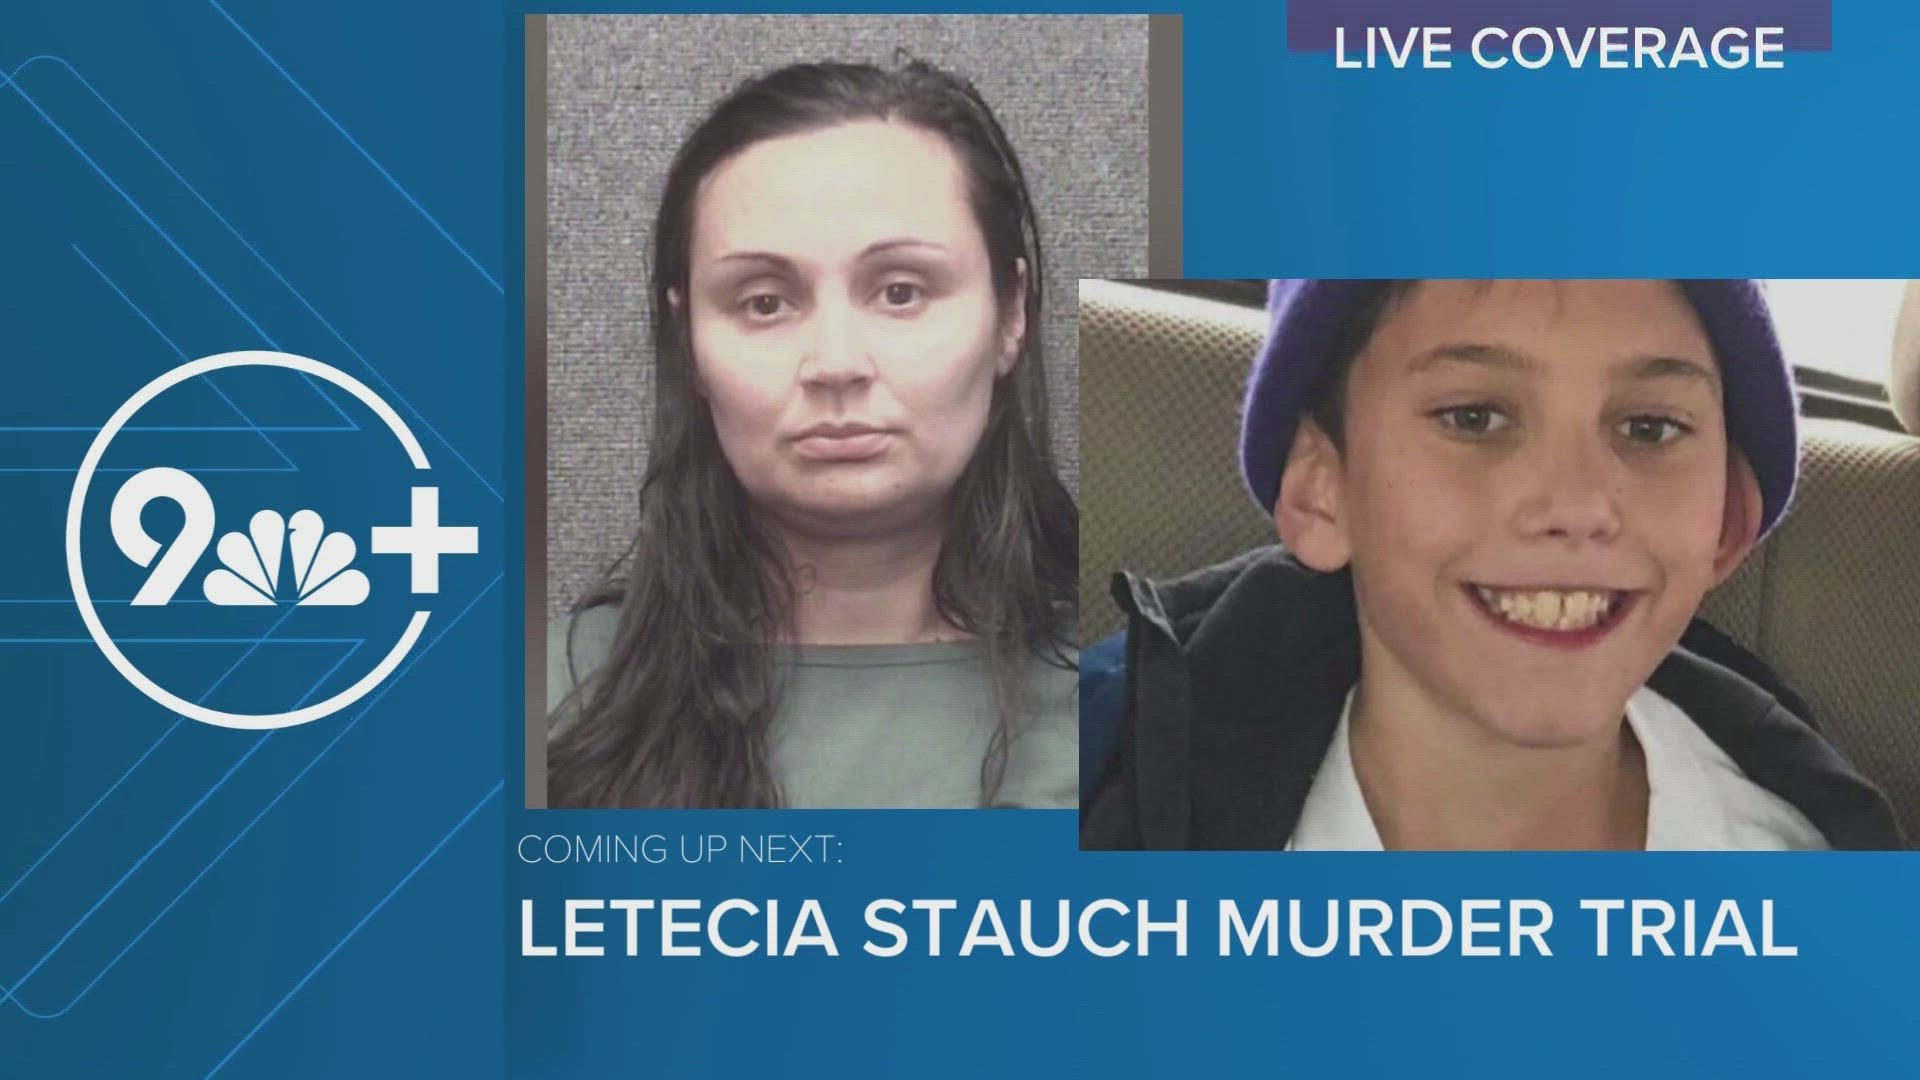 Letecia Stauch is accused of killing her stepson, Gannon Stauch, in January 2020.